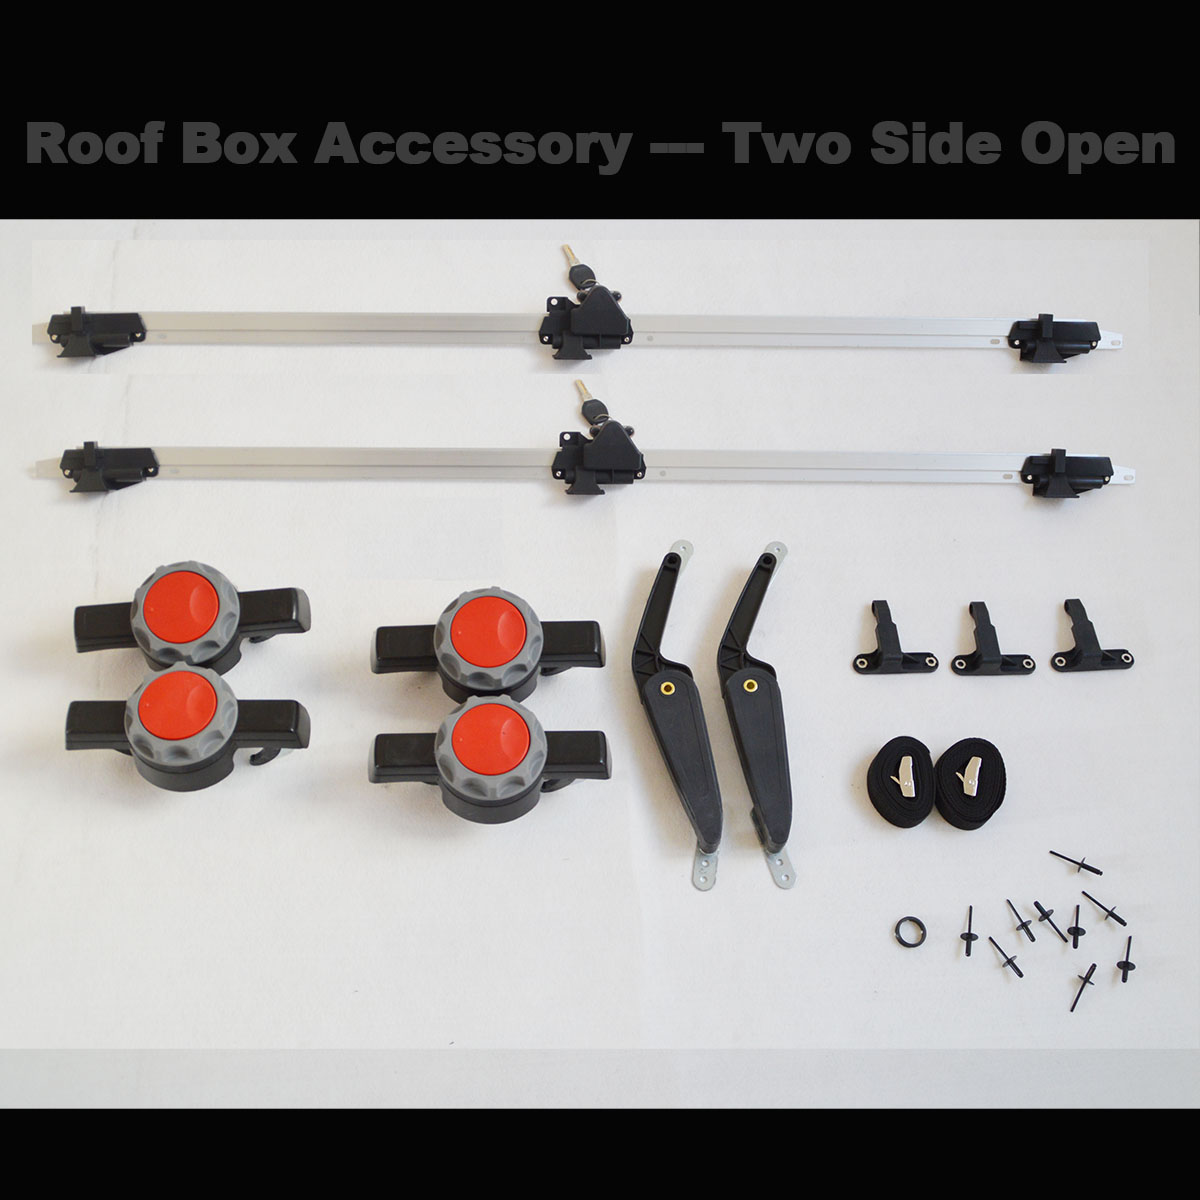 Roof box accessories —two side open